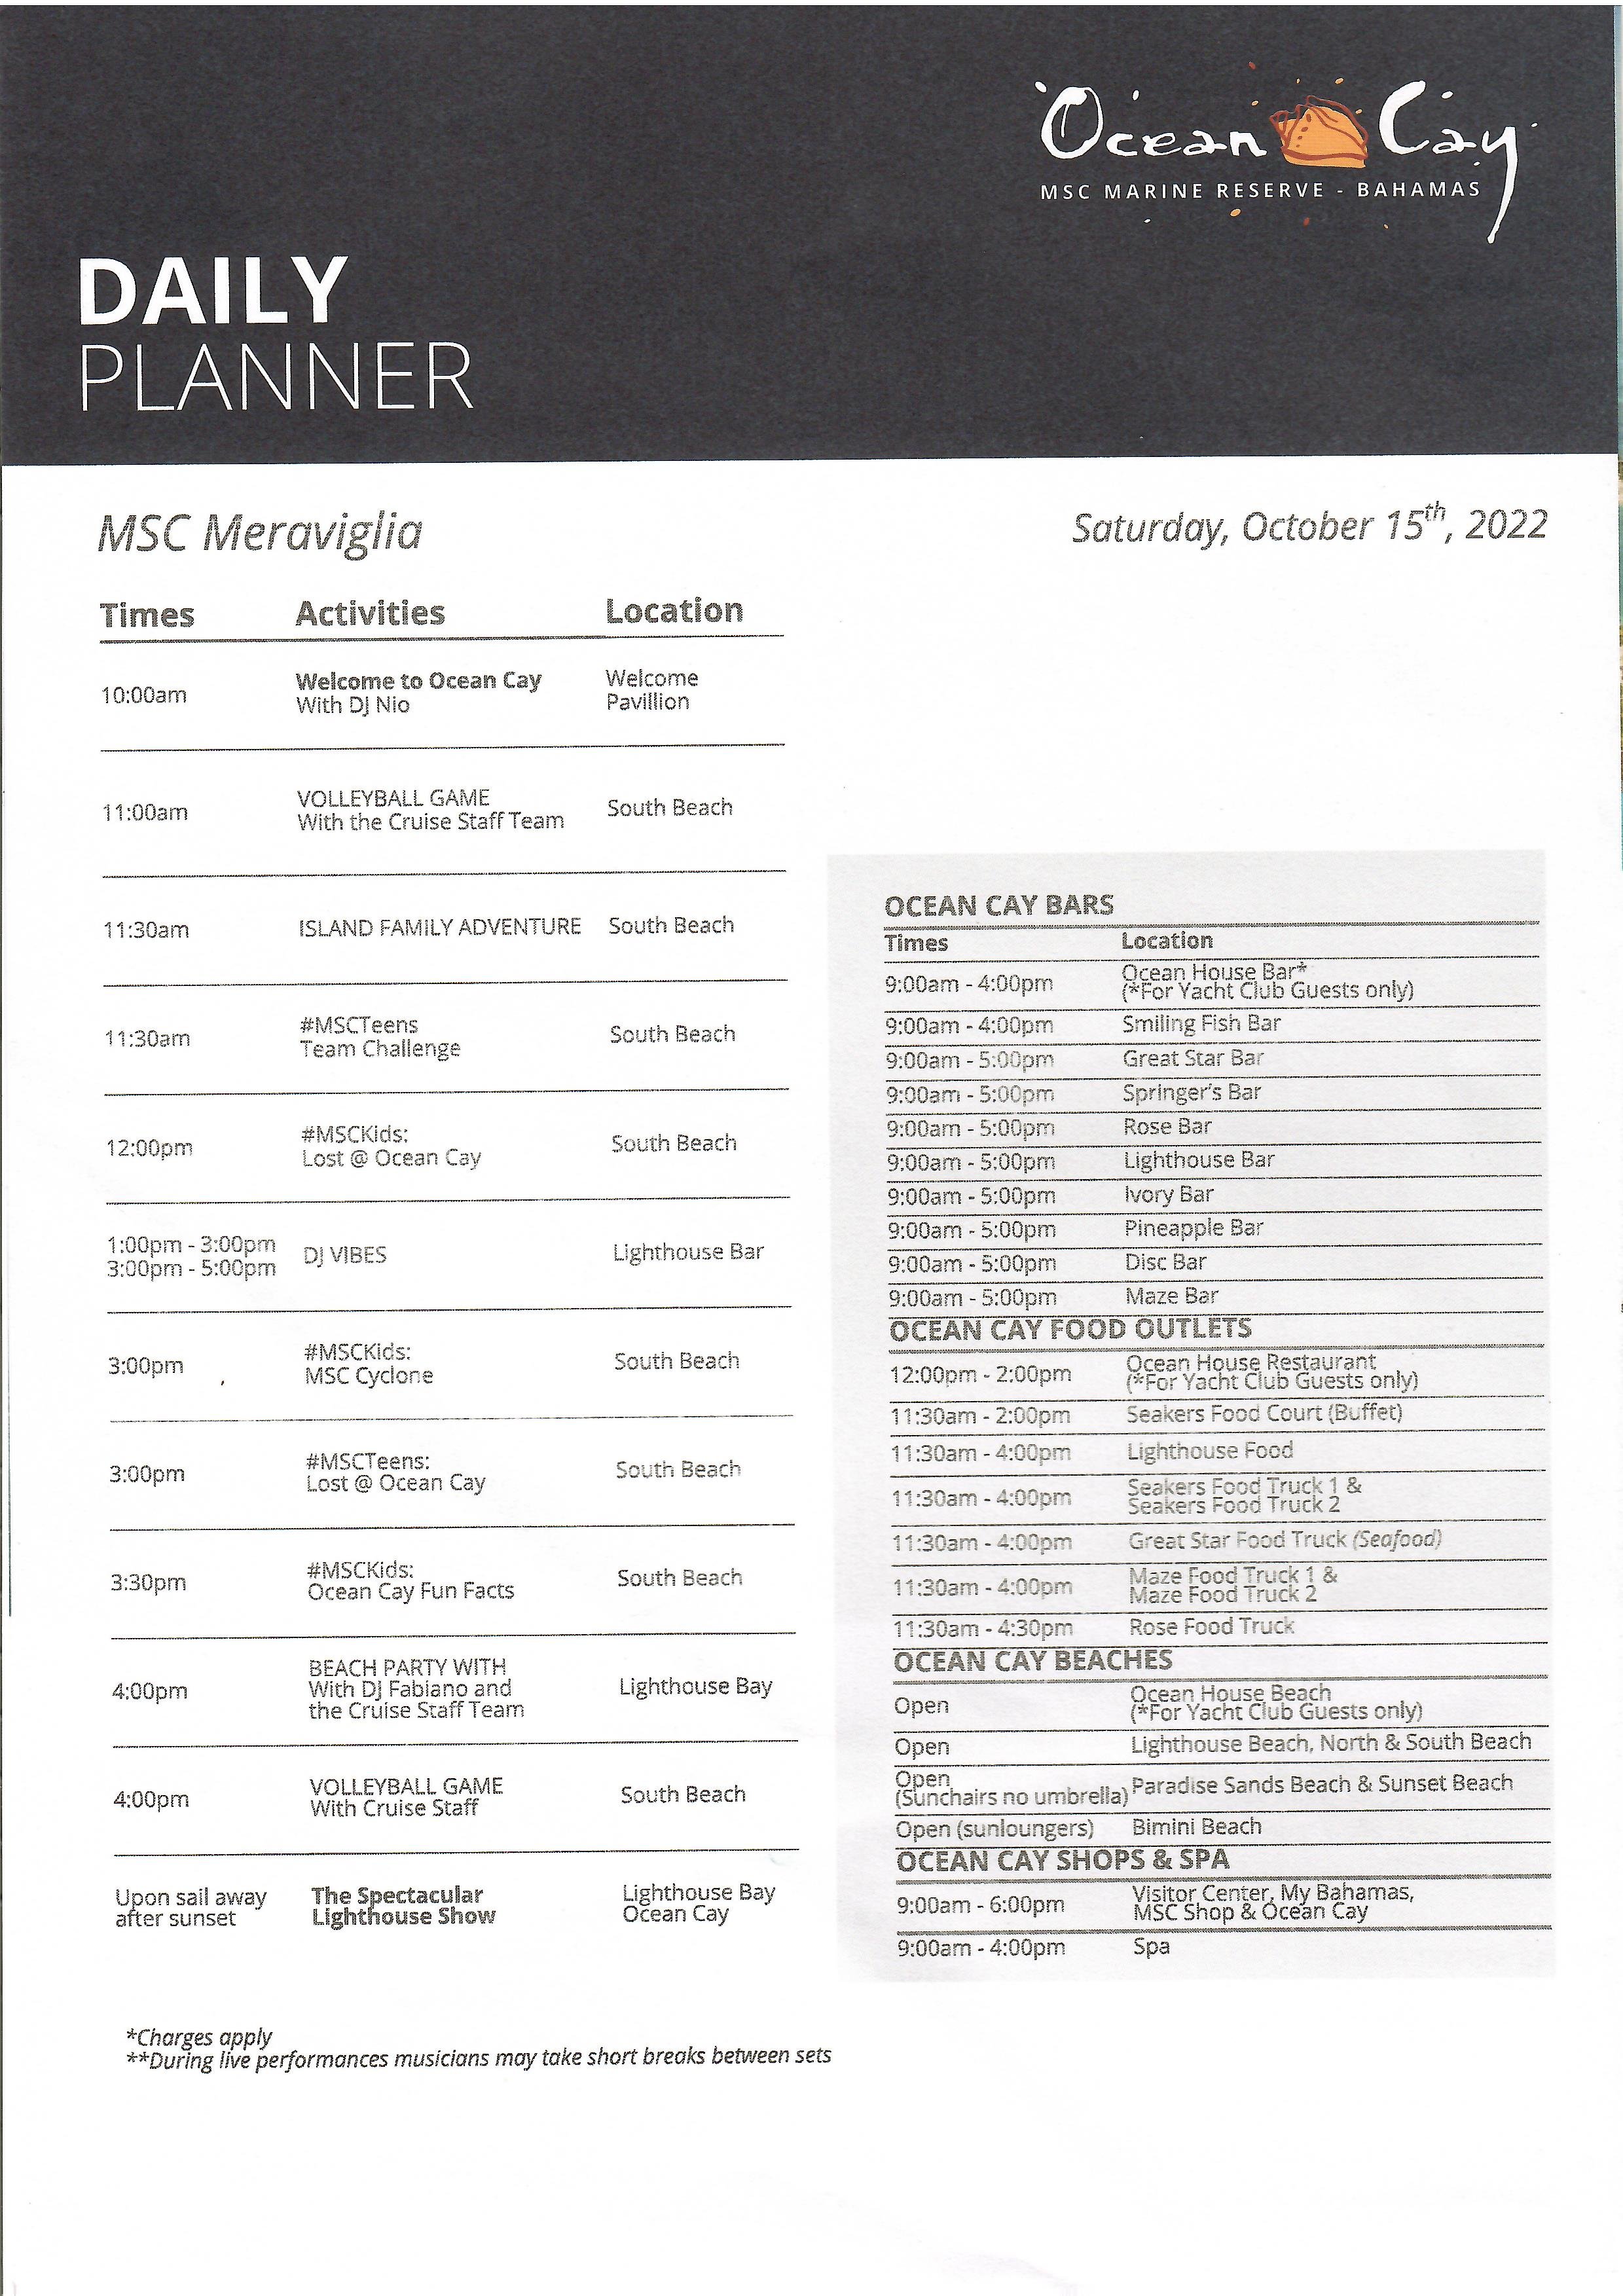 Daily Planner -OceanCay Island - October 15, 2022 page 01.jpg